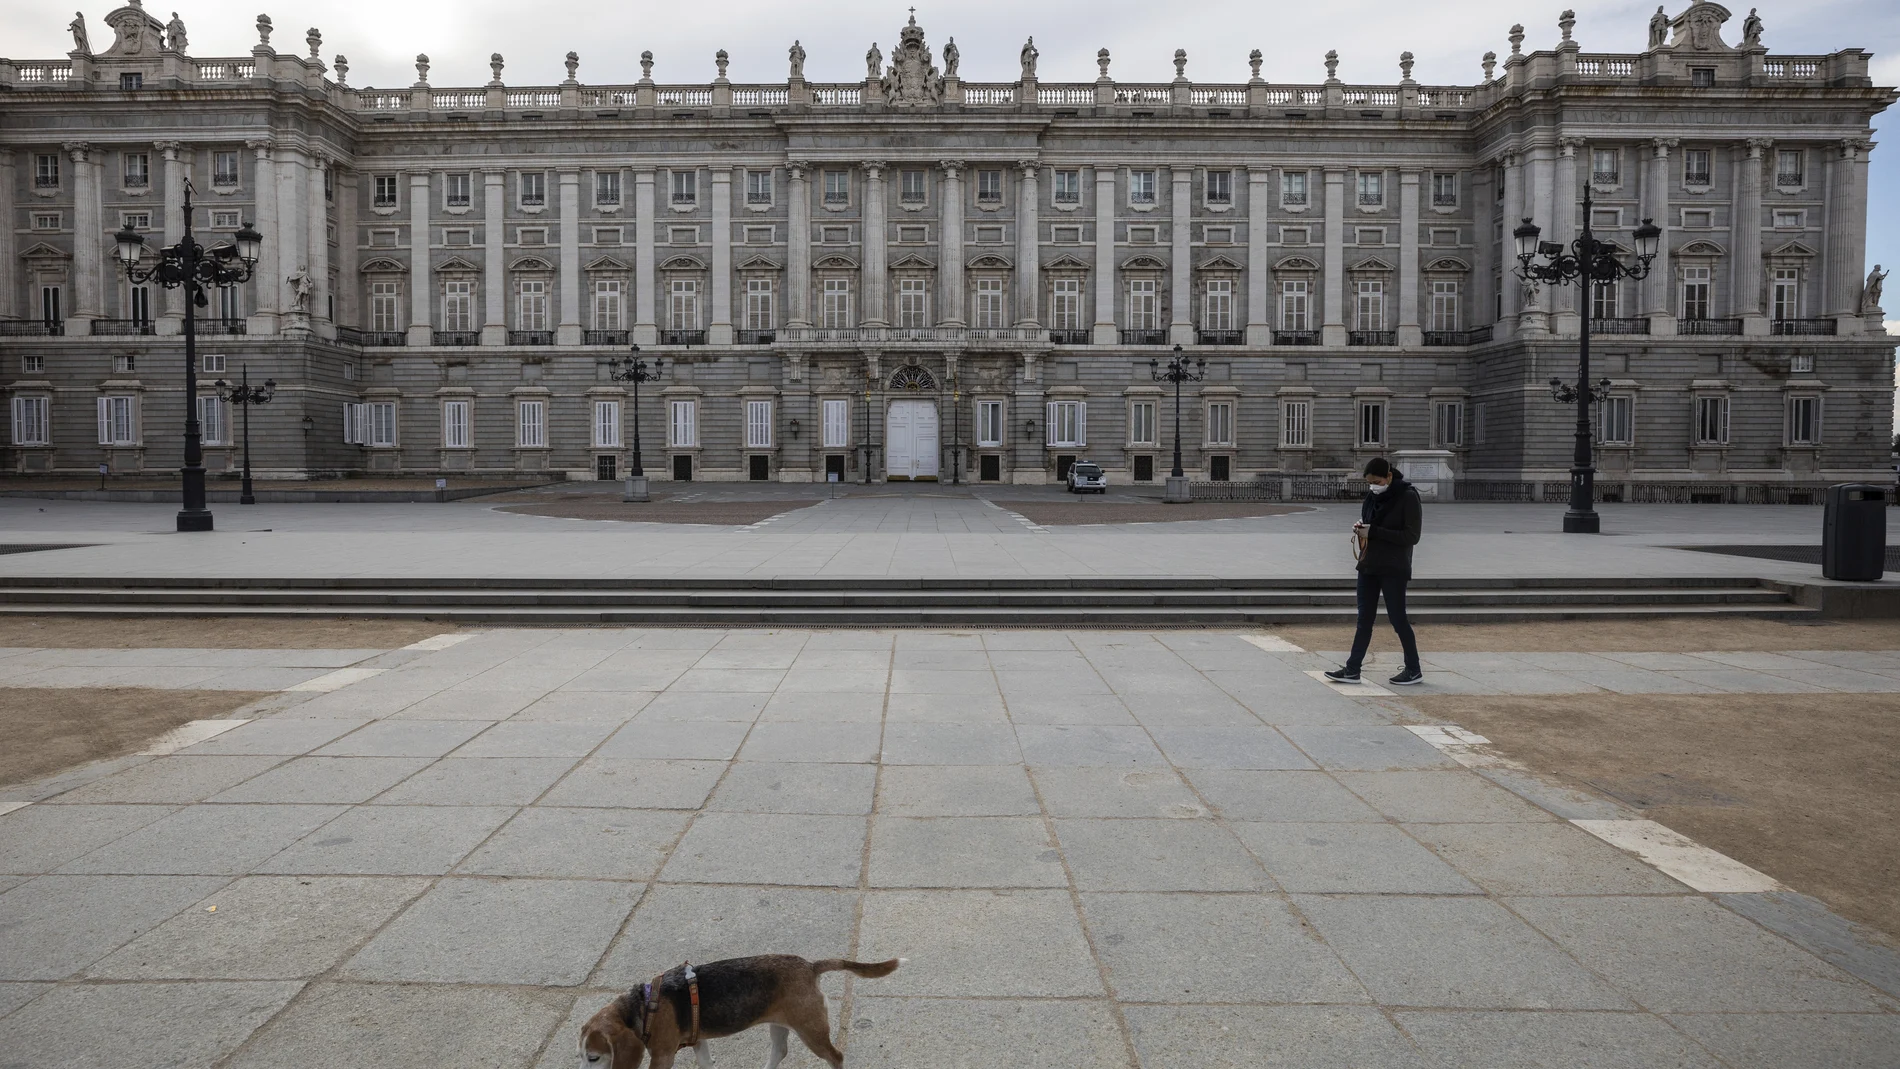 A woman walks her dog around the Royal palace in downtown Madrid, Spain, Sunday, March 15, 2020. Spain awoke to its first day of a nationwide quarantine on Sunday after the government declared a two-week state of emergency. The government imposed the special measures including the confinement of people to their homes unless shopping for food and medicine, going to and from work, and to meet other basic needs. The vast majority of people recover from the new coronavirus. According to the World Health Organization, most people recover in about two to six weeks, depending on the severity of the illness. (AP Photo/Bernat Armangue)